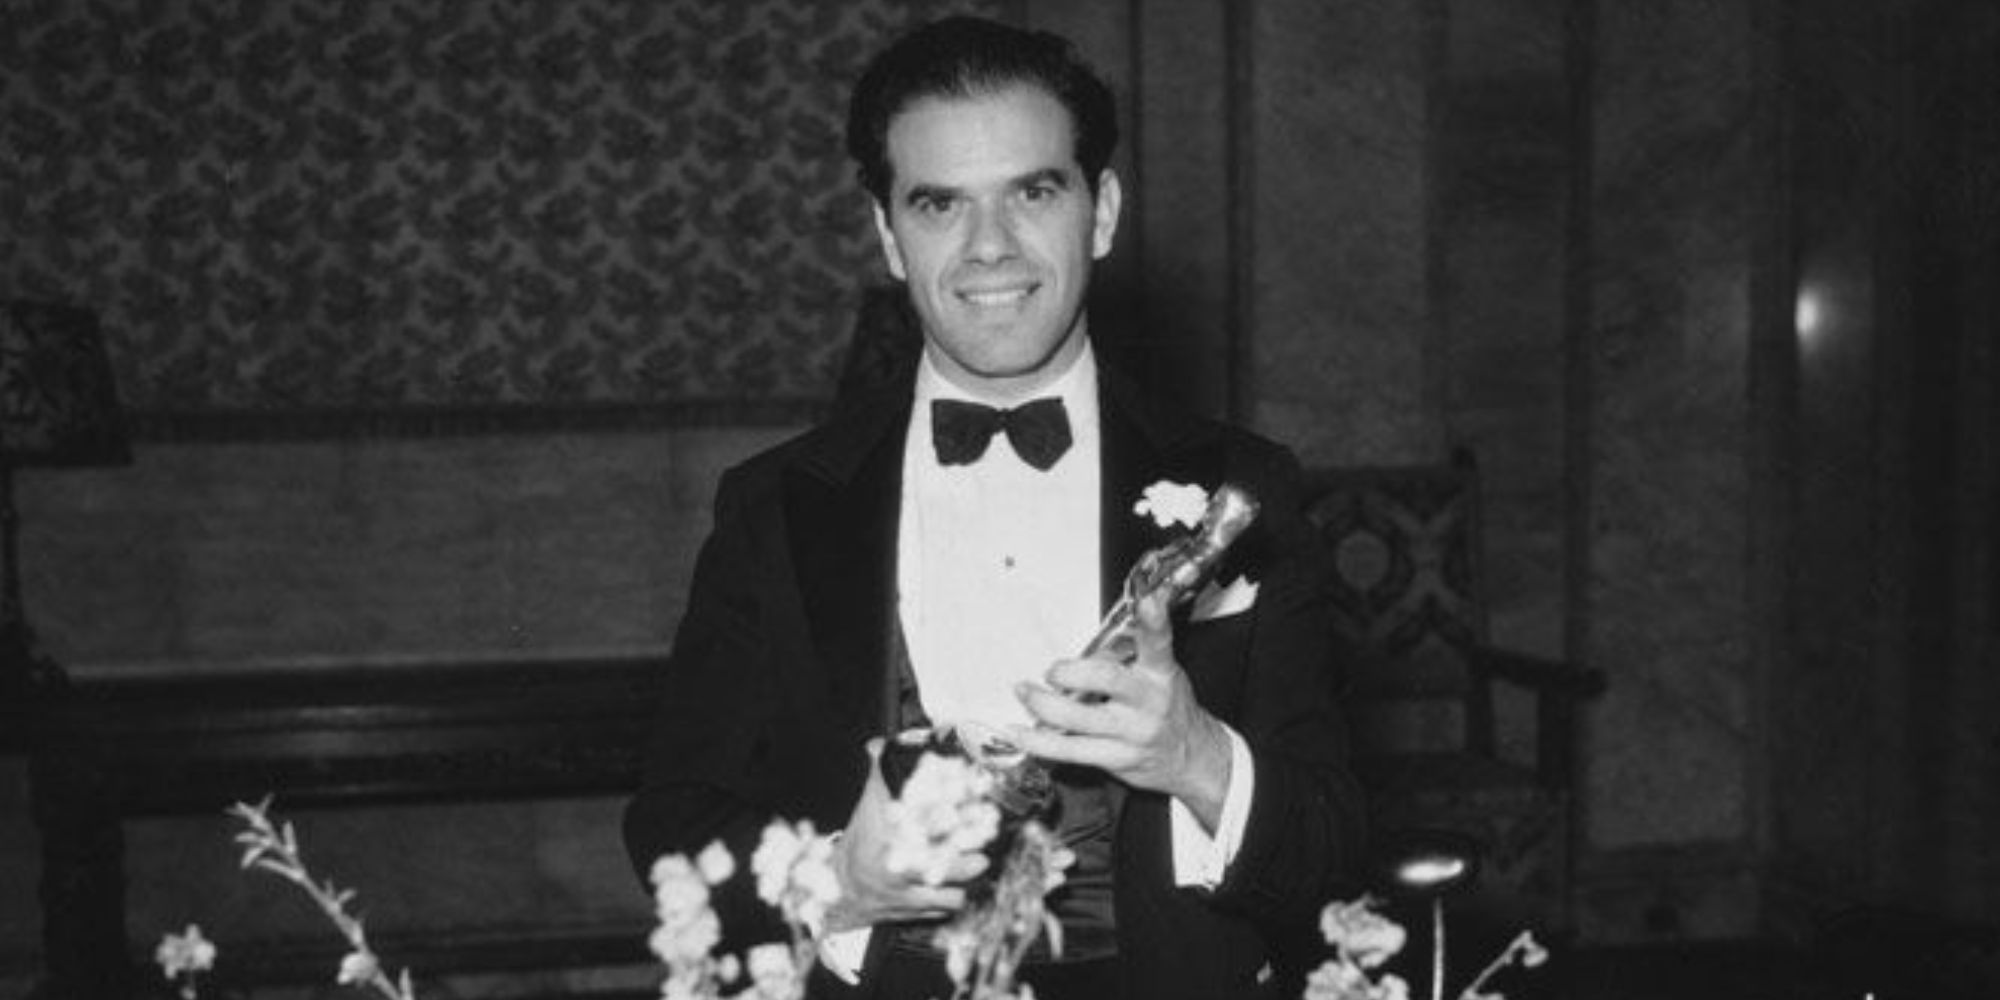 Frank Capra with his Oscar at the 1935 Academy Awards via The Academy of Motion Pictures and Science